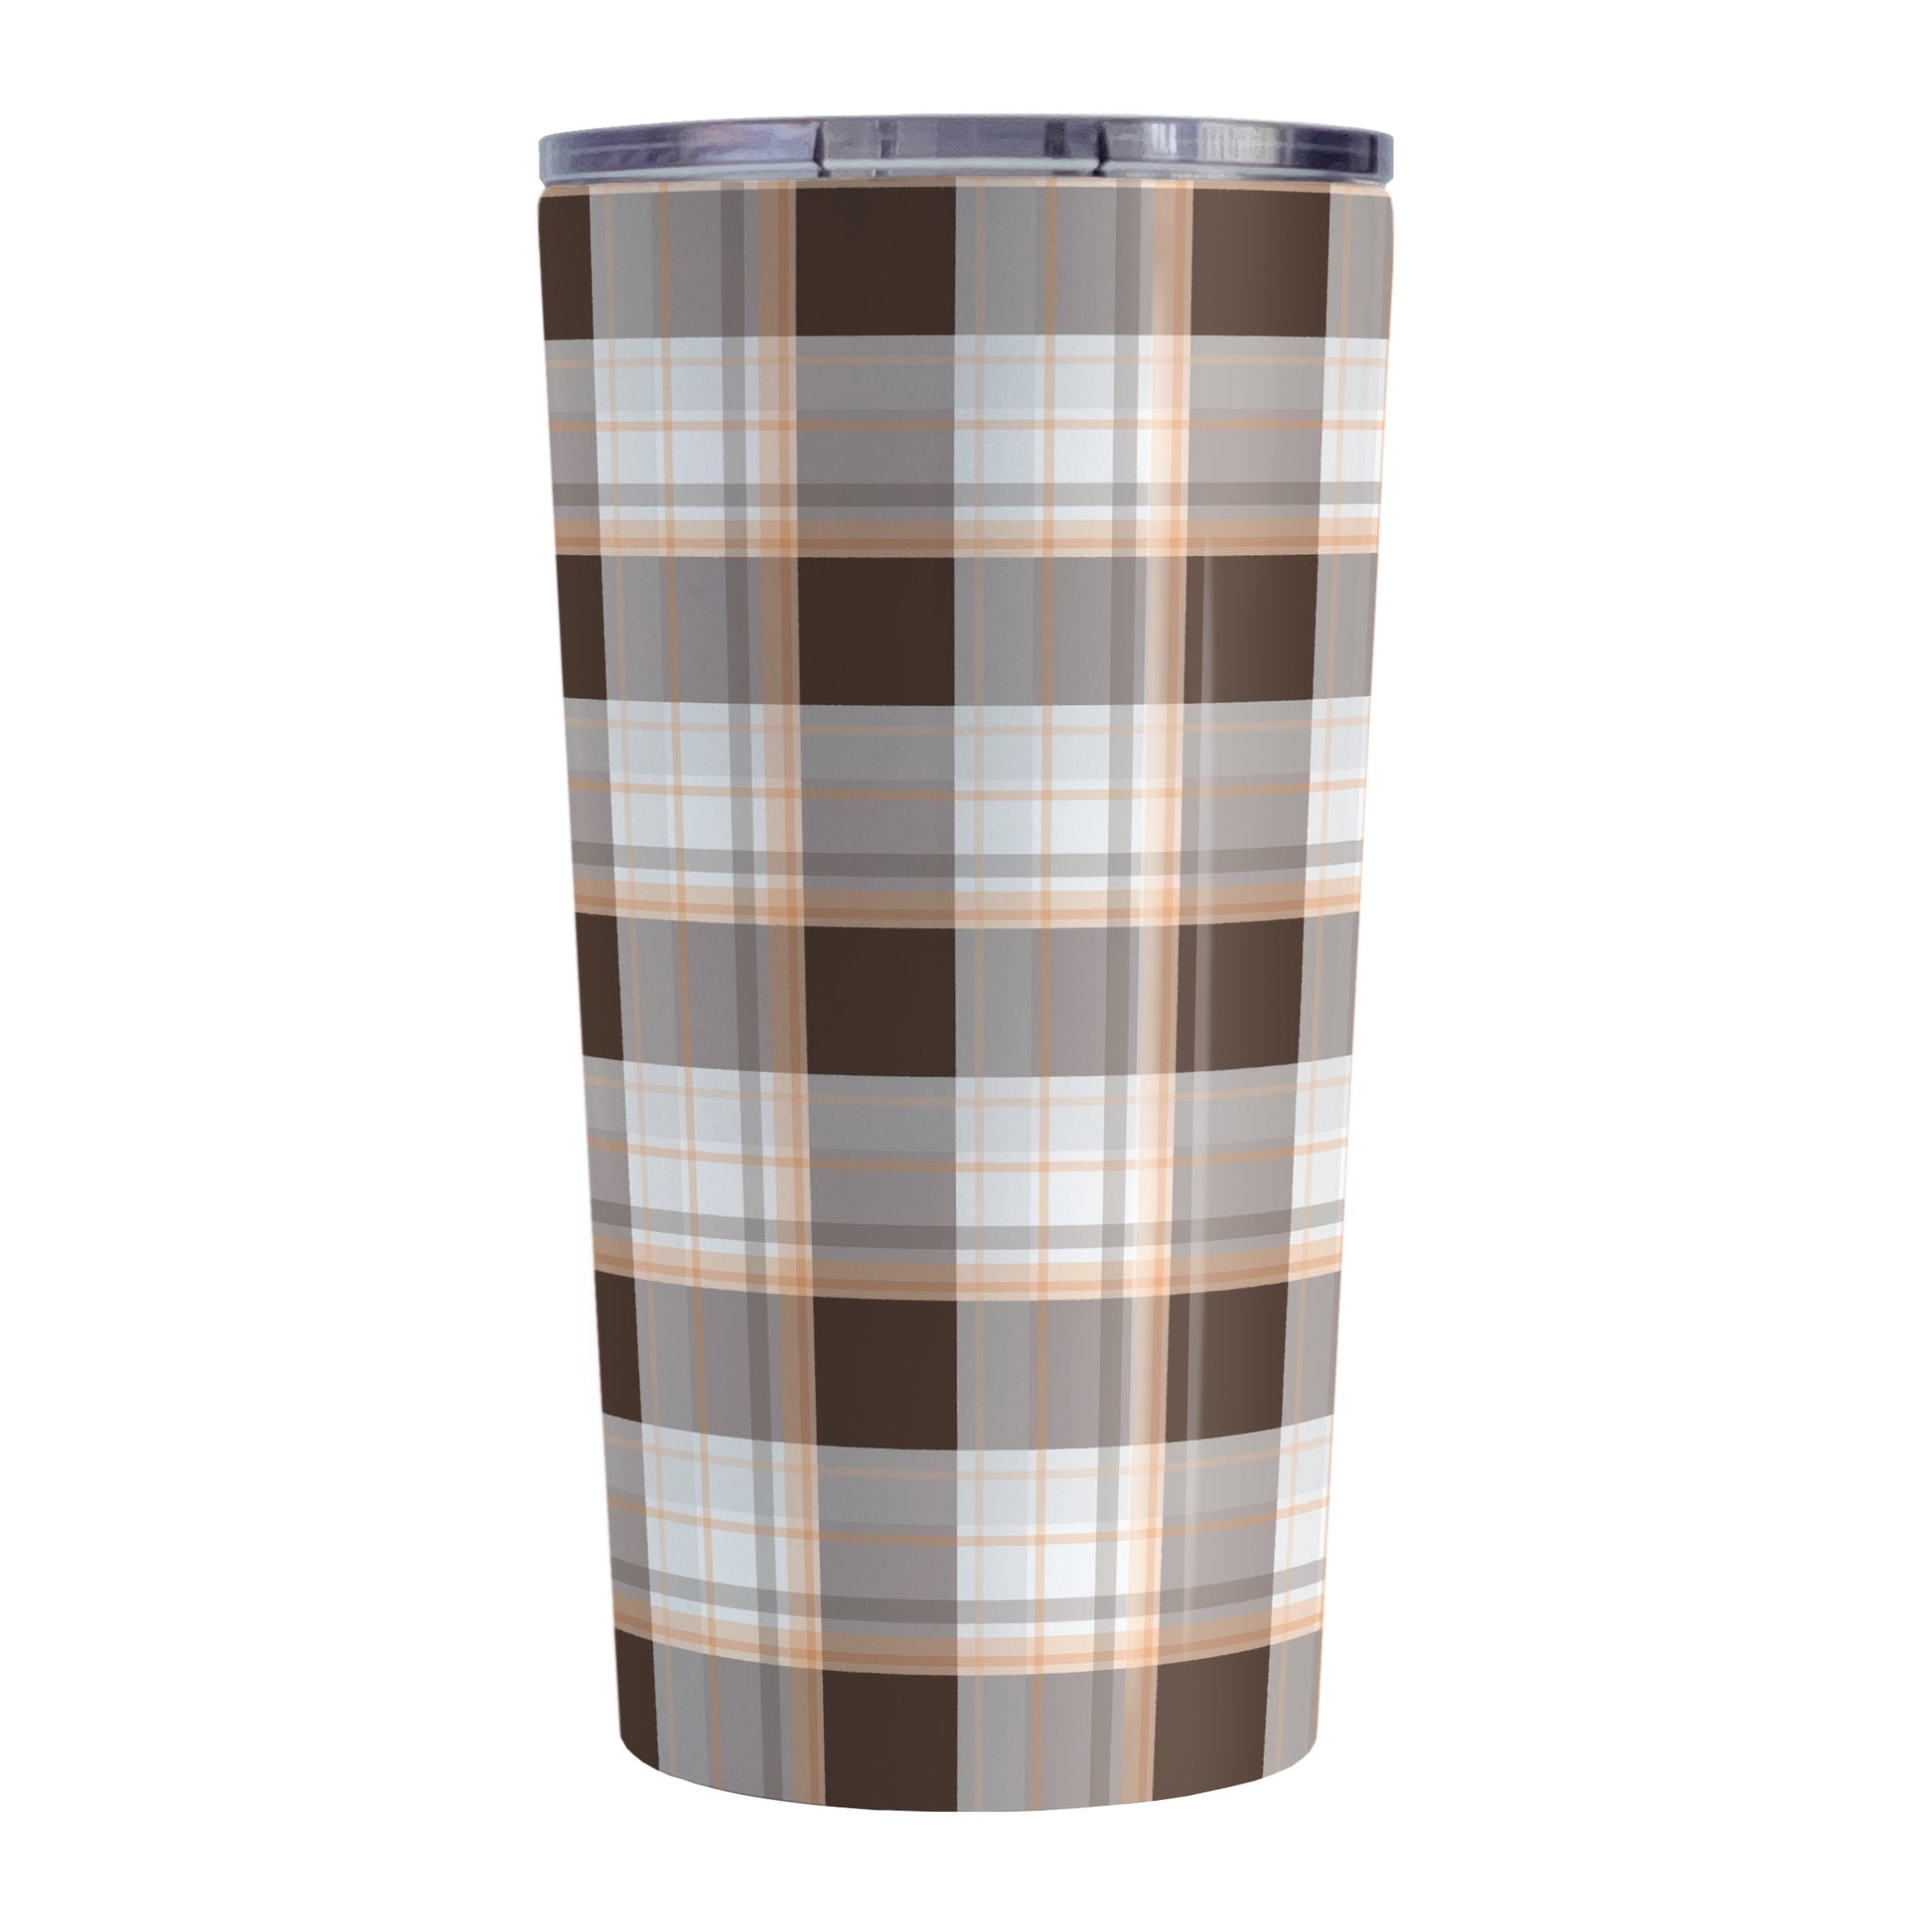 Brown Orange Plaid Tumbler Cup (20oz) at Amy's Coffee Mugs. A stainless steel insulated tumbler cup designed with a brown plaid pattern with orange accents that wraps around the cup. 